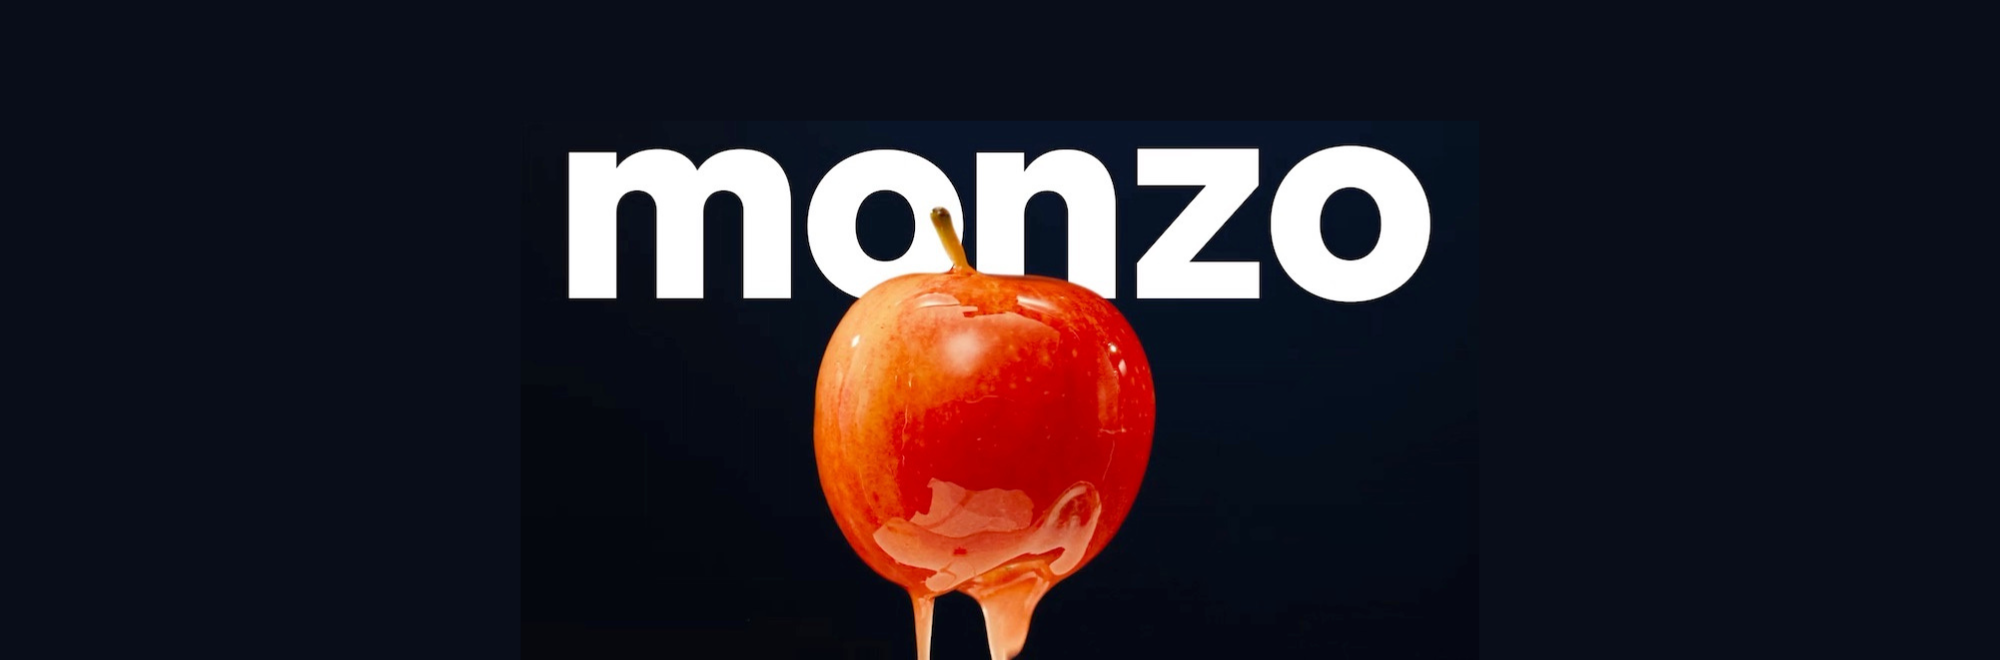 Uncommon and Monzo rethink traditional banking aesthetics in a new energetic campaign